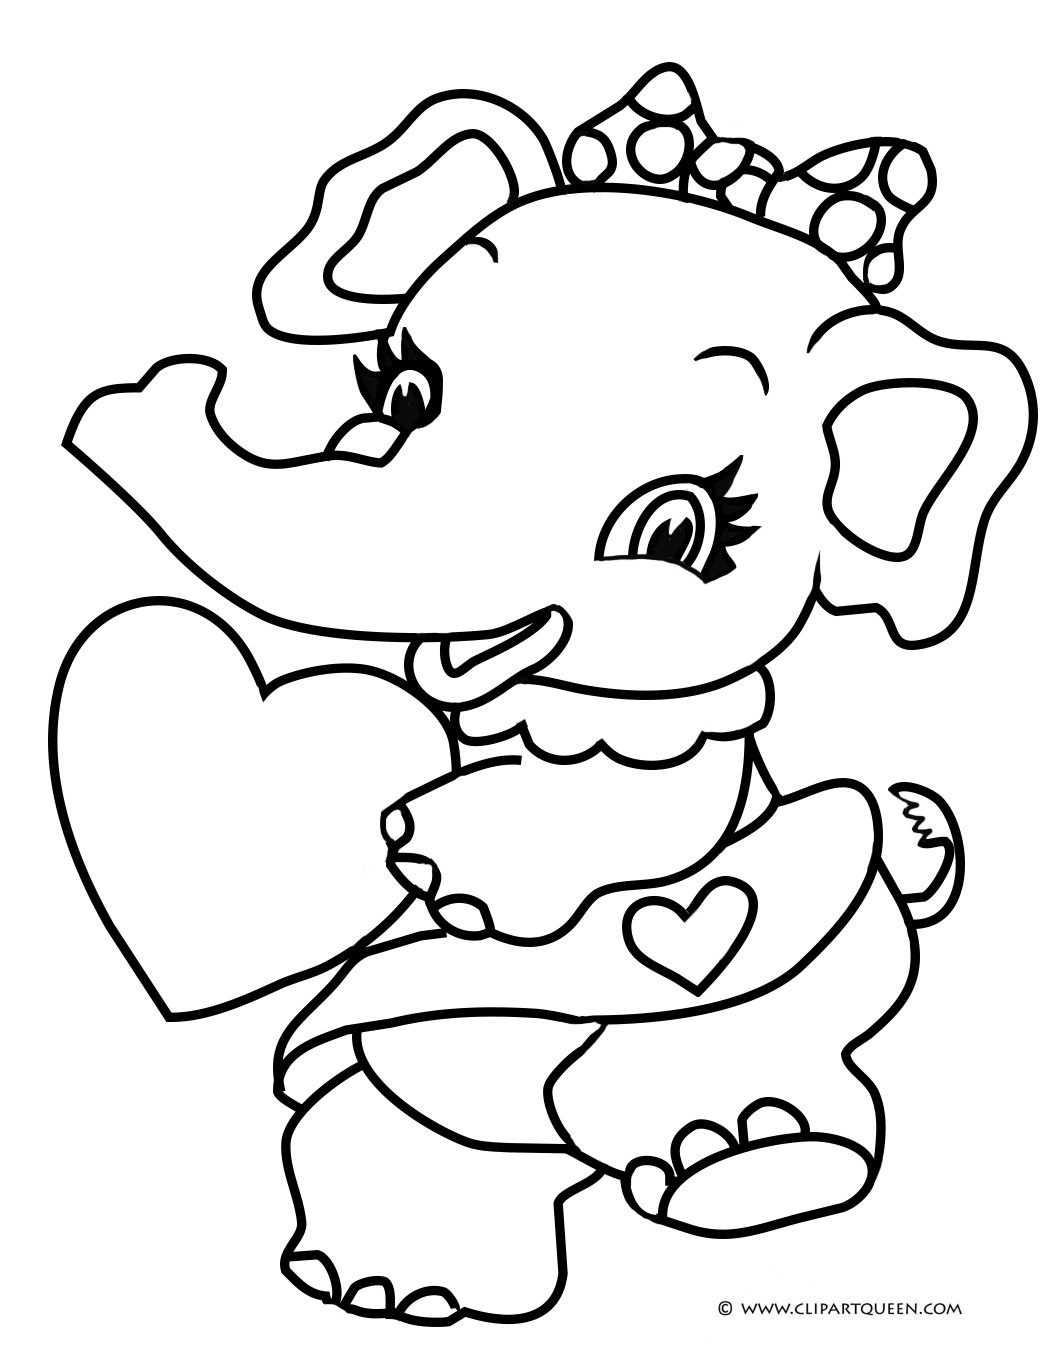 Valentines Day Printable Coloring Pages
 13 Valentine s Day coloring pages